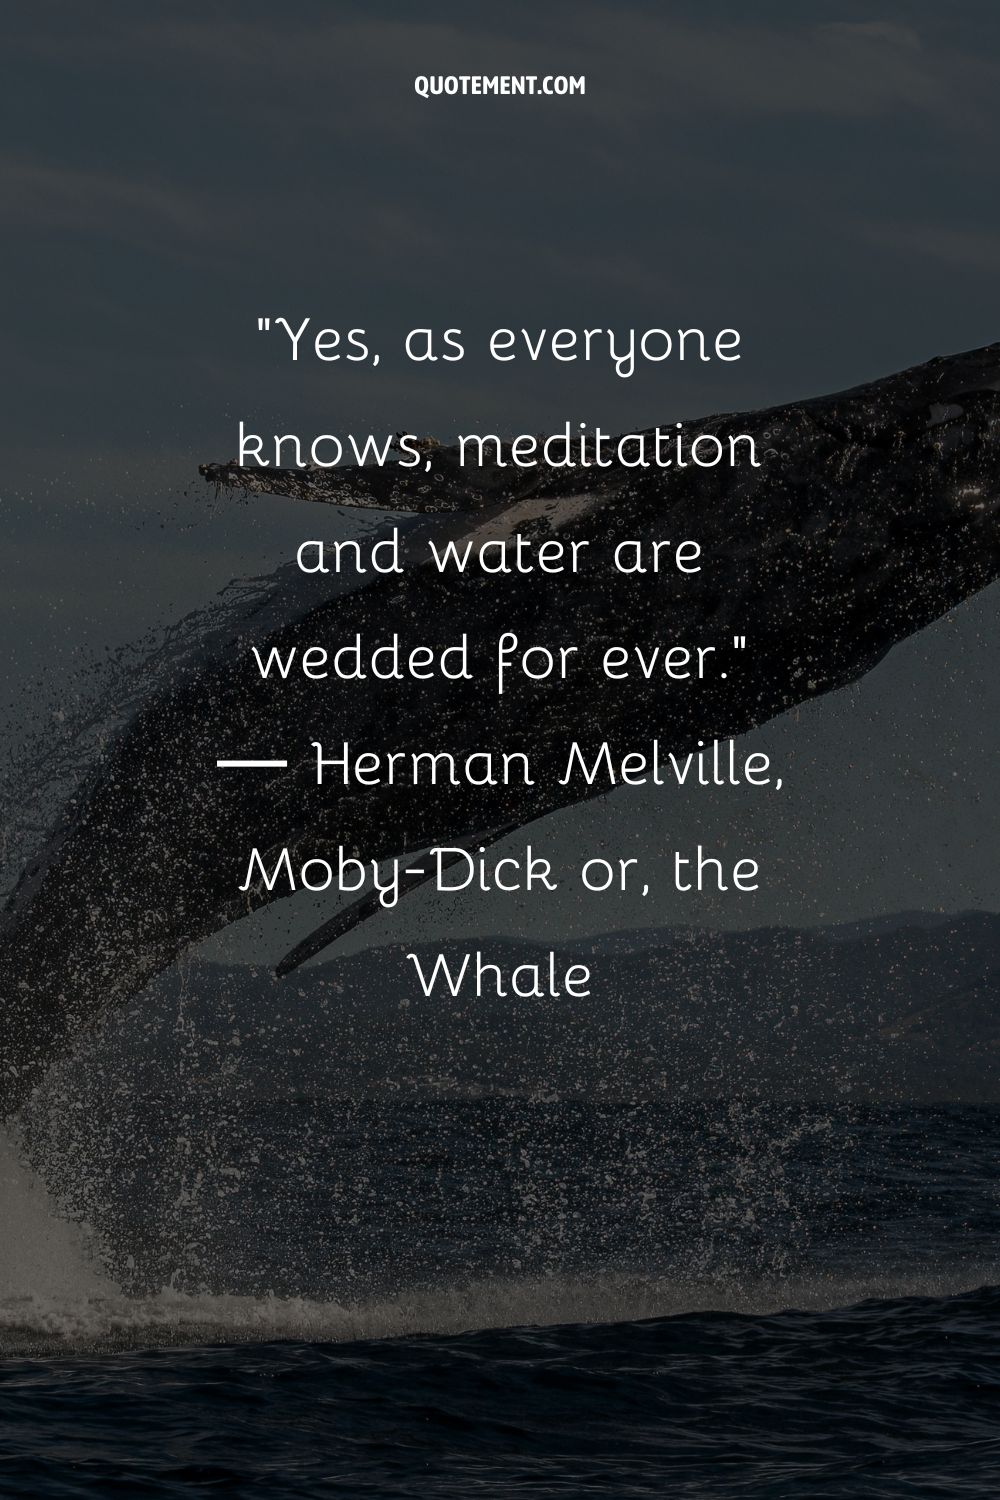 Yes, as everyone knows, meditation and water are wedded for ever.